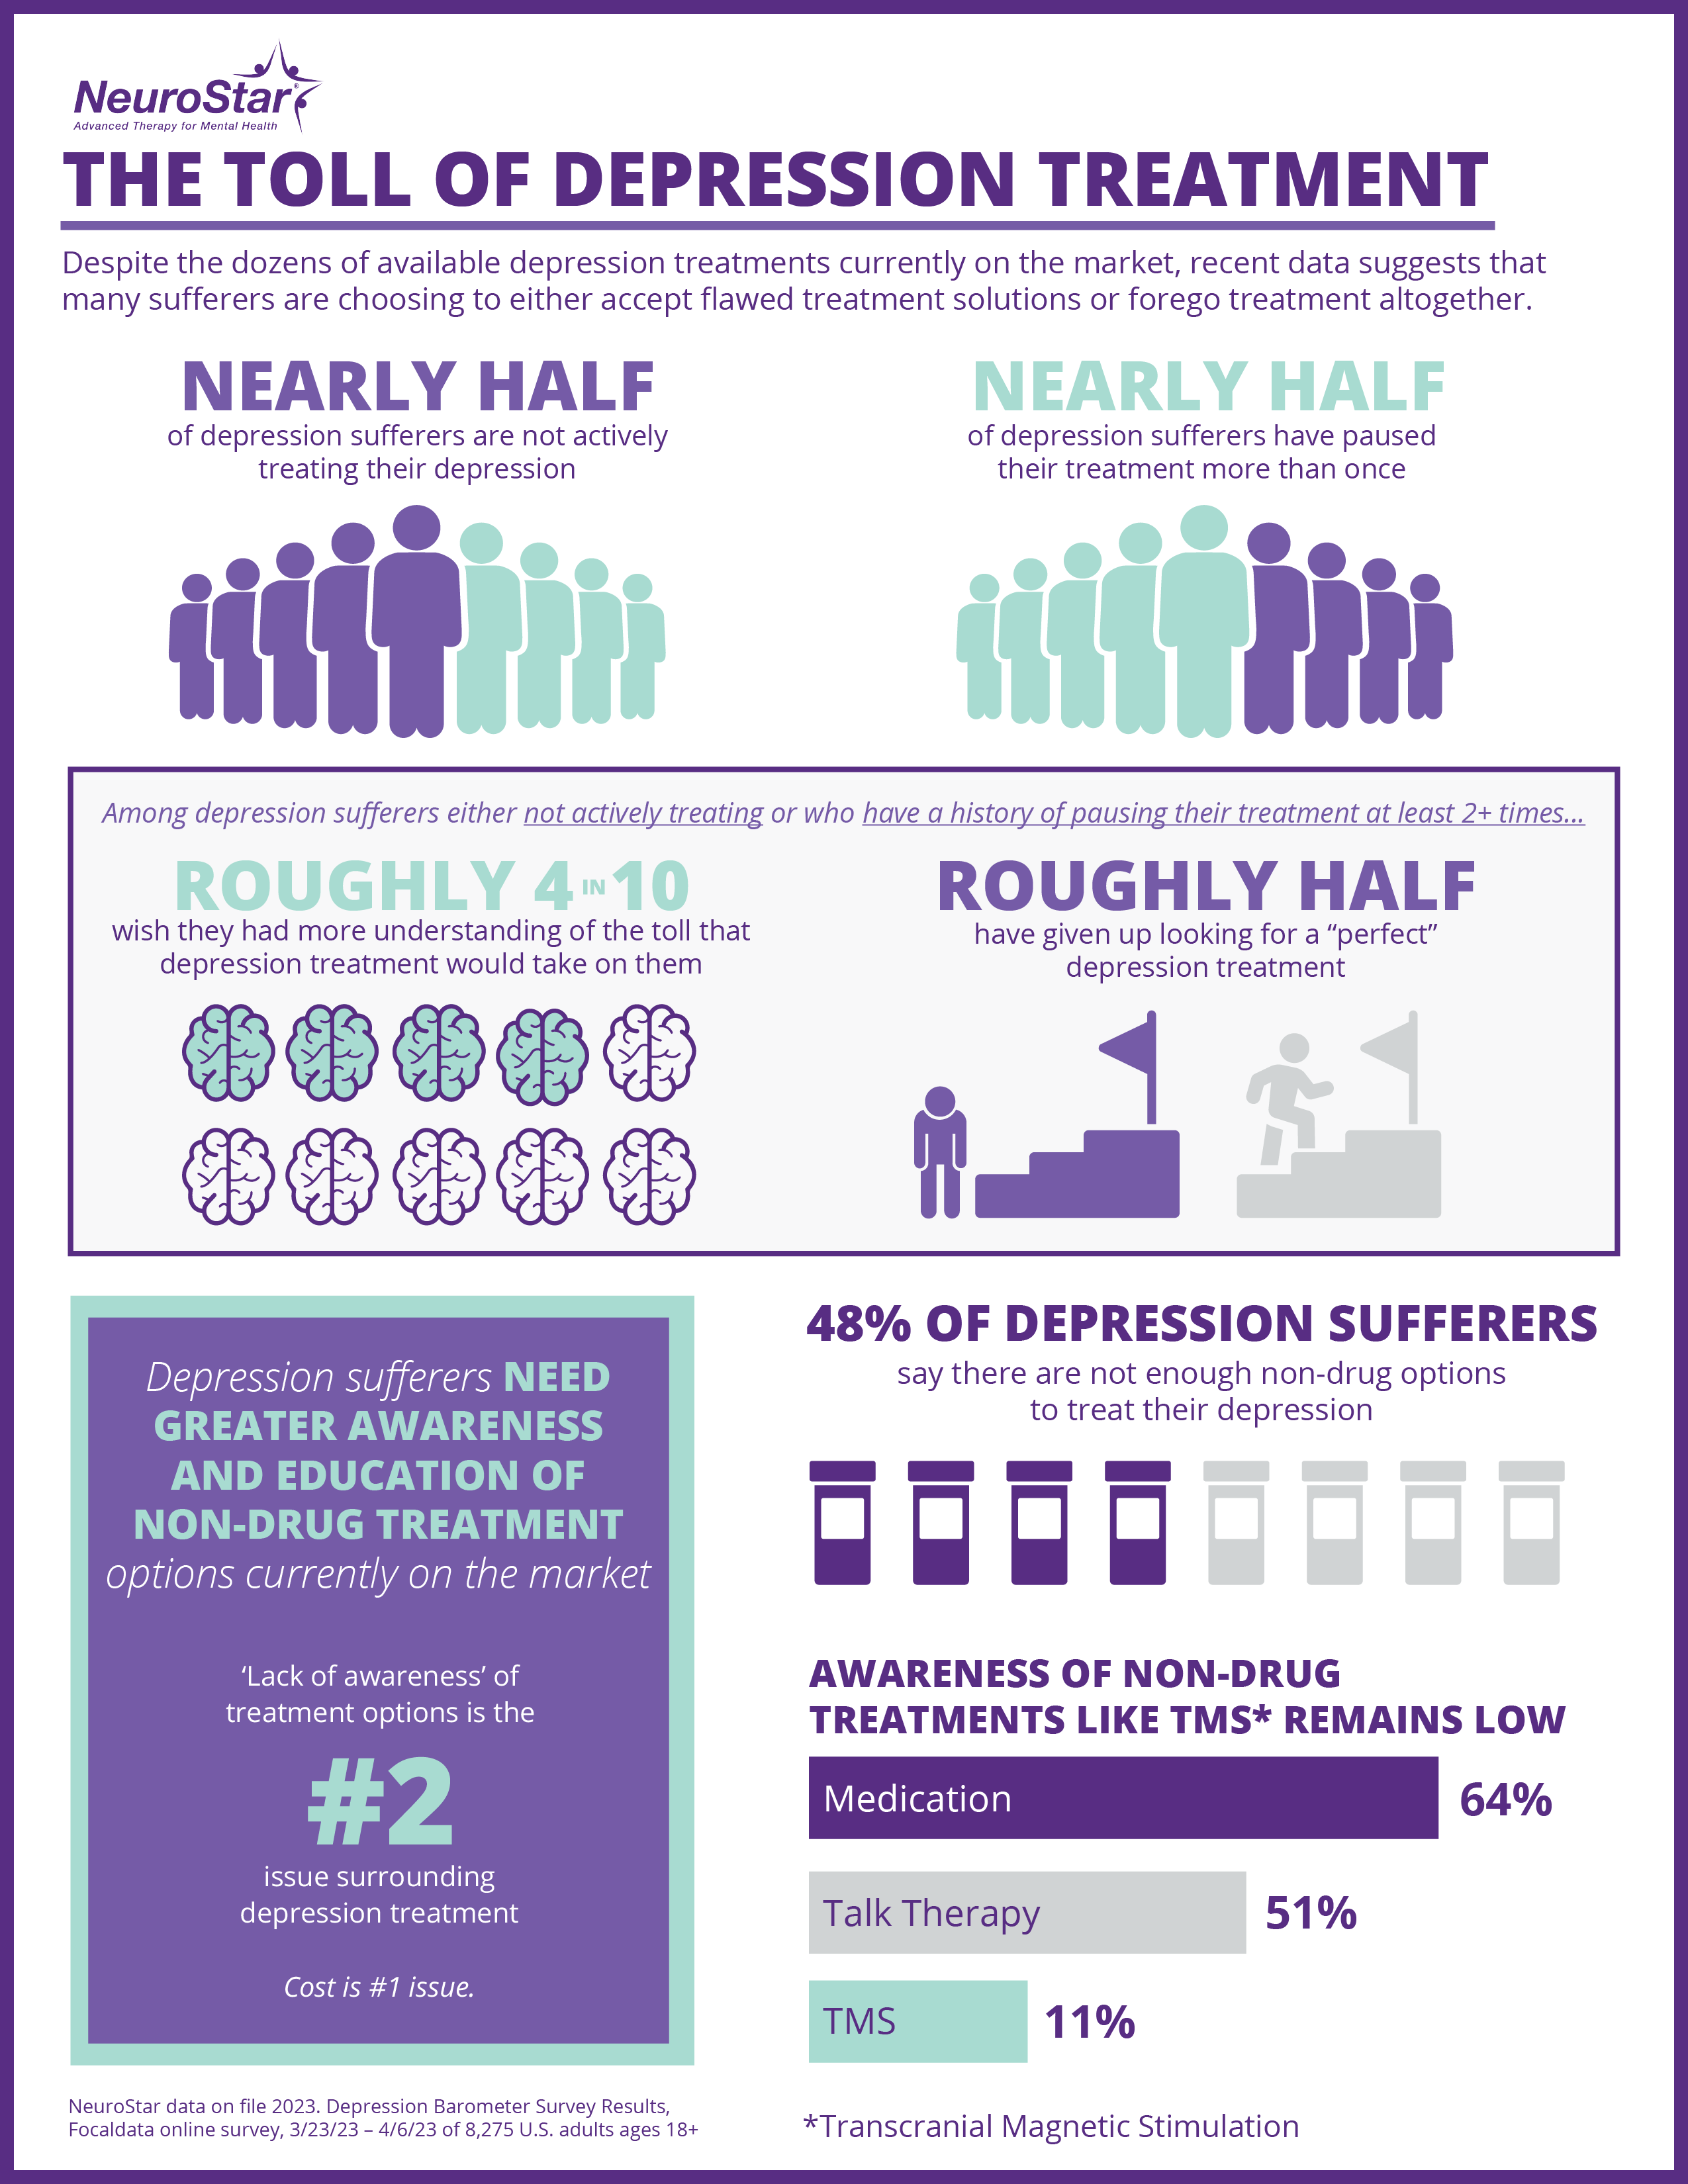 FocalData survey results released by NeuroStar detail how U.S. depression sufferers feel about the mental and physical toll of depression treatment.